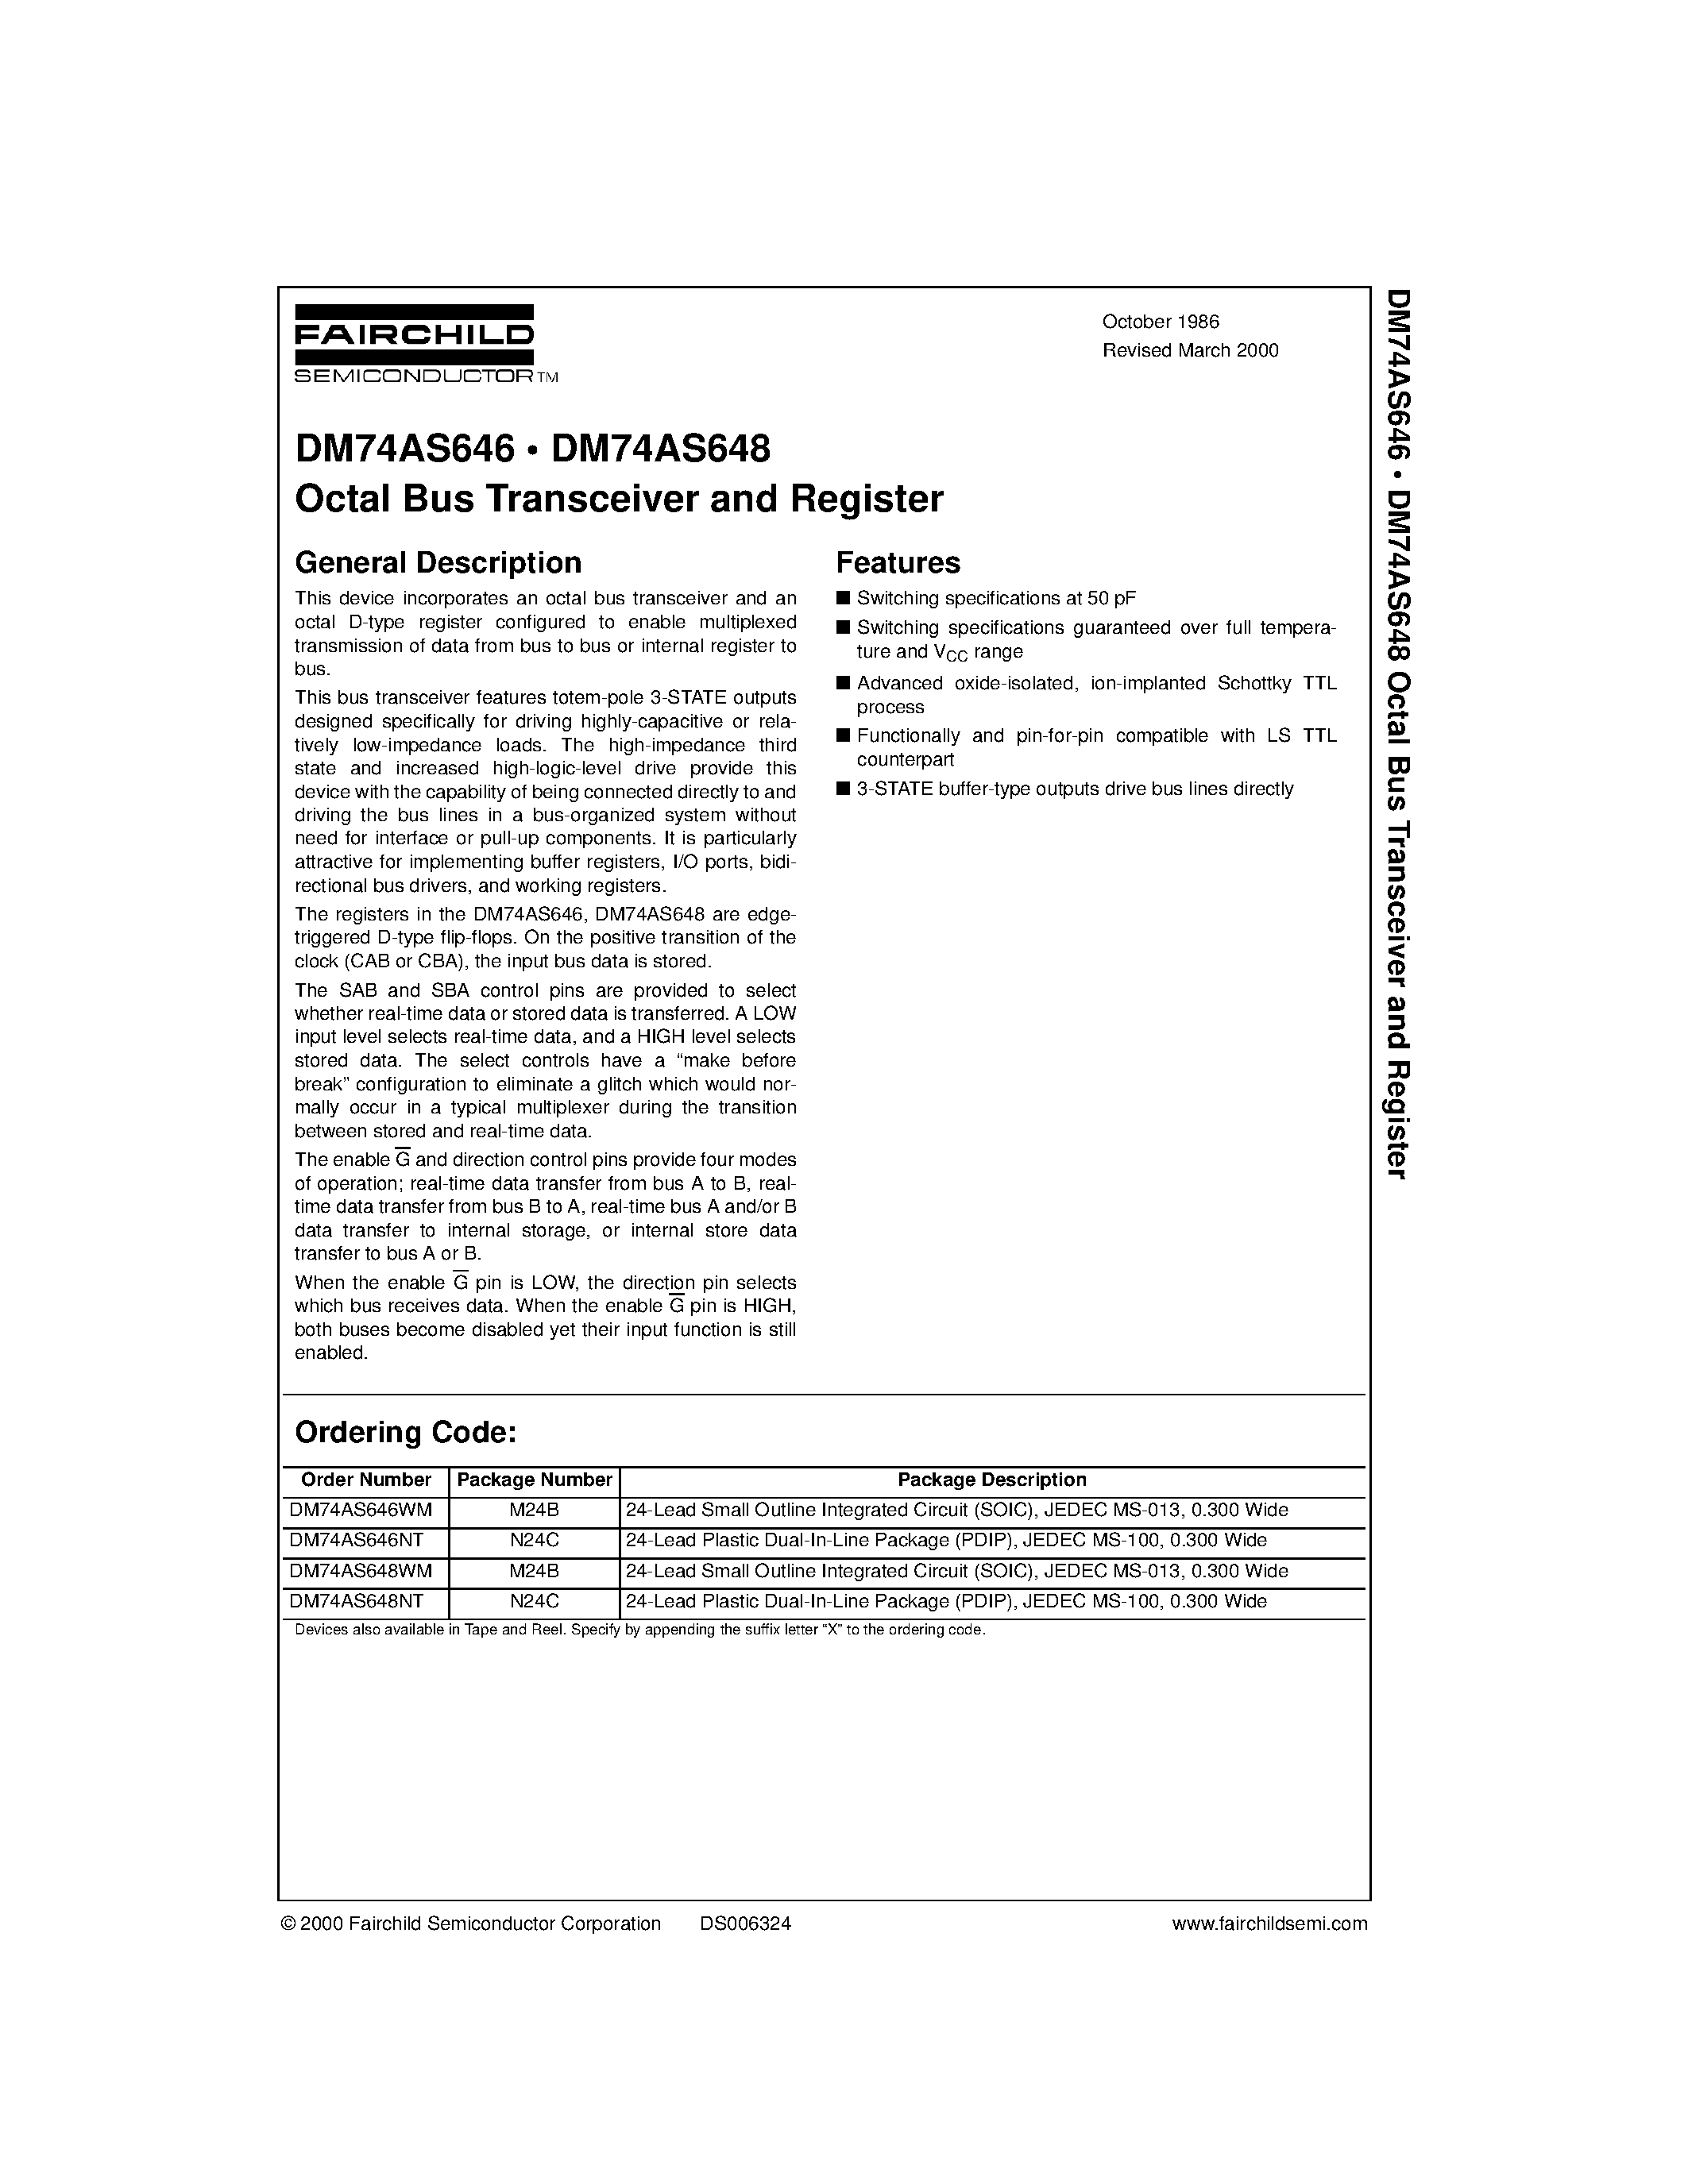 Datasheet DM74AS646WM - Octal Bus Transceiver and Register page 1